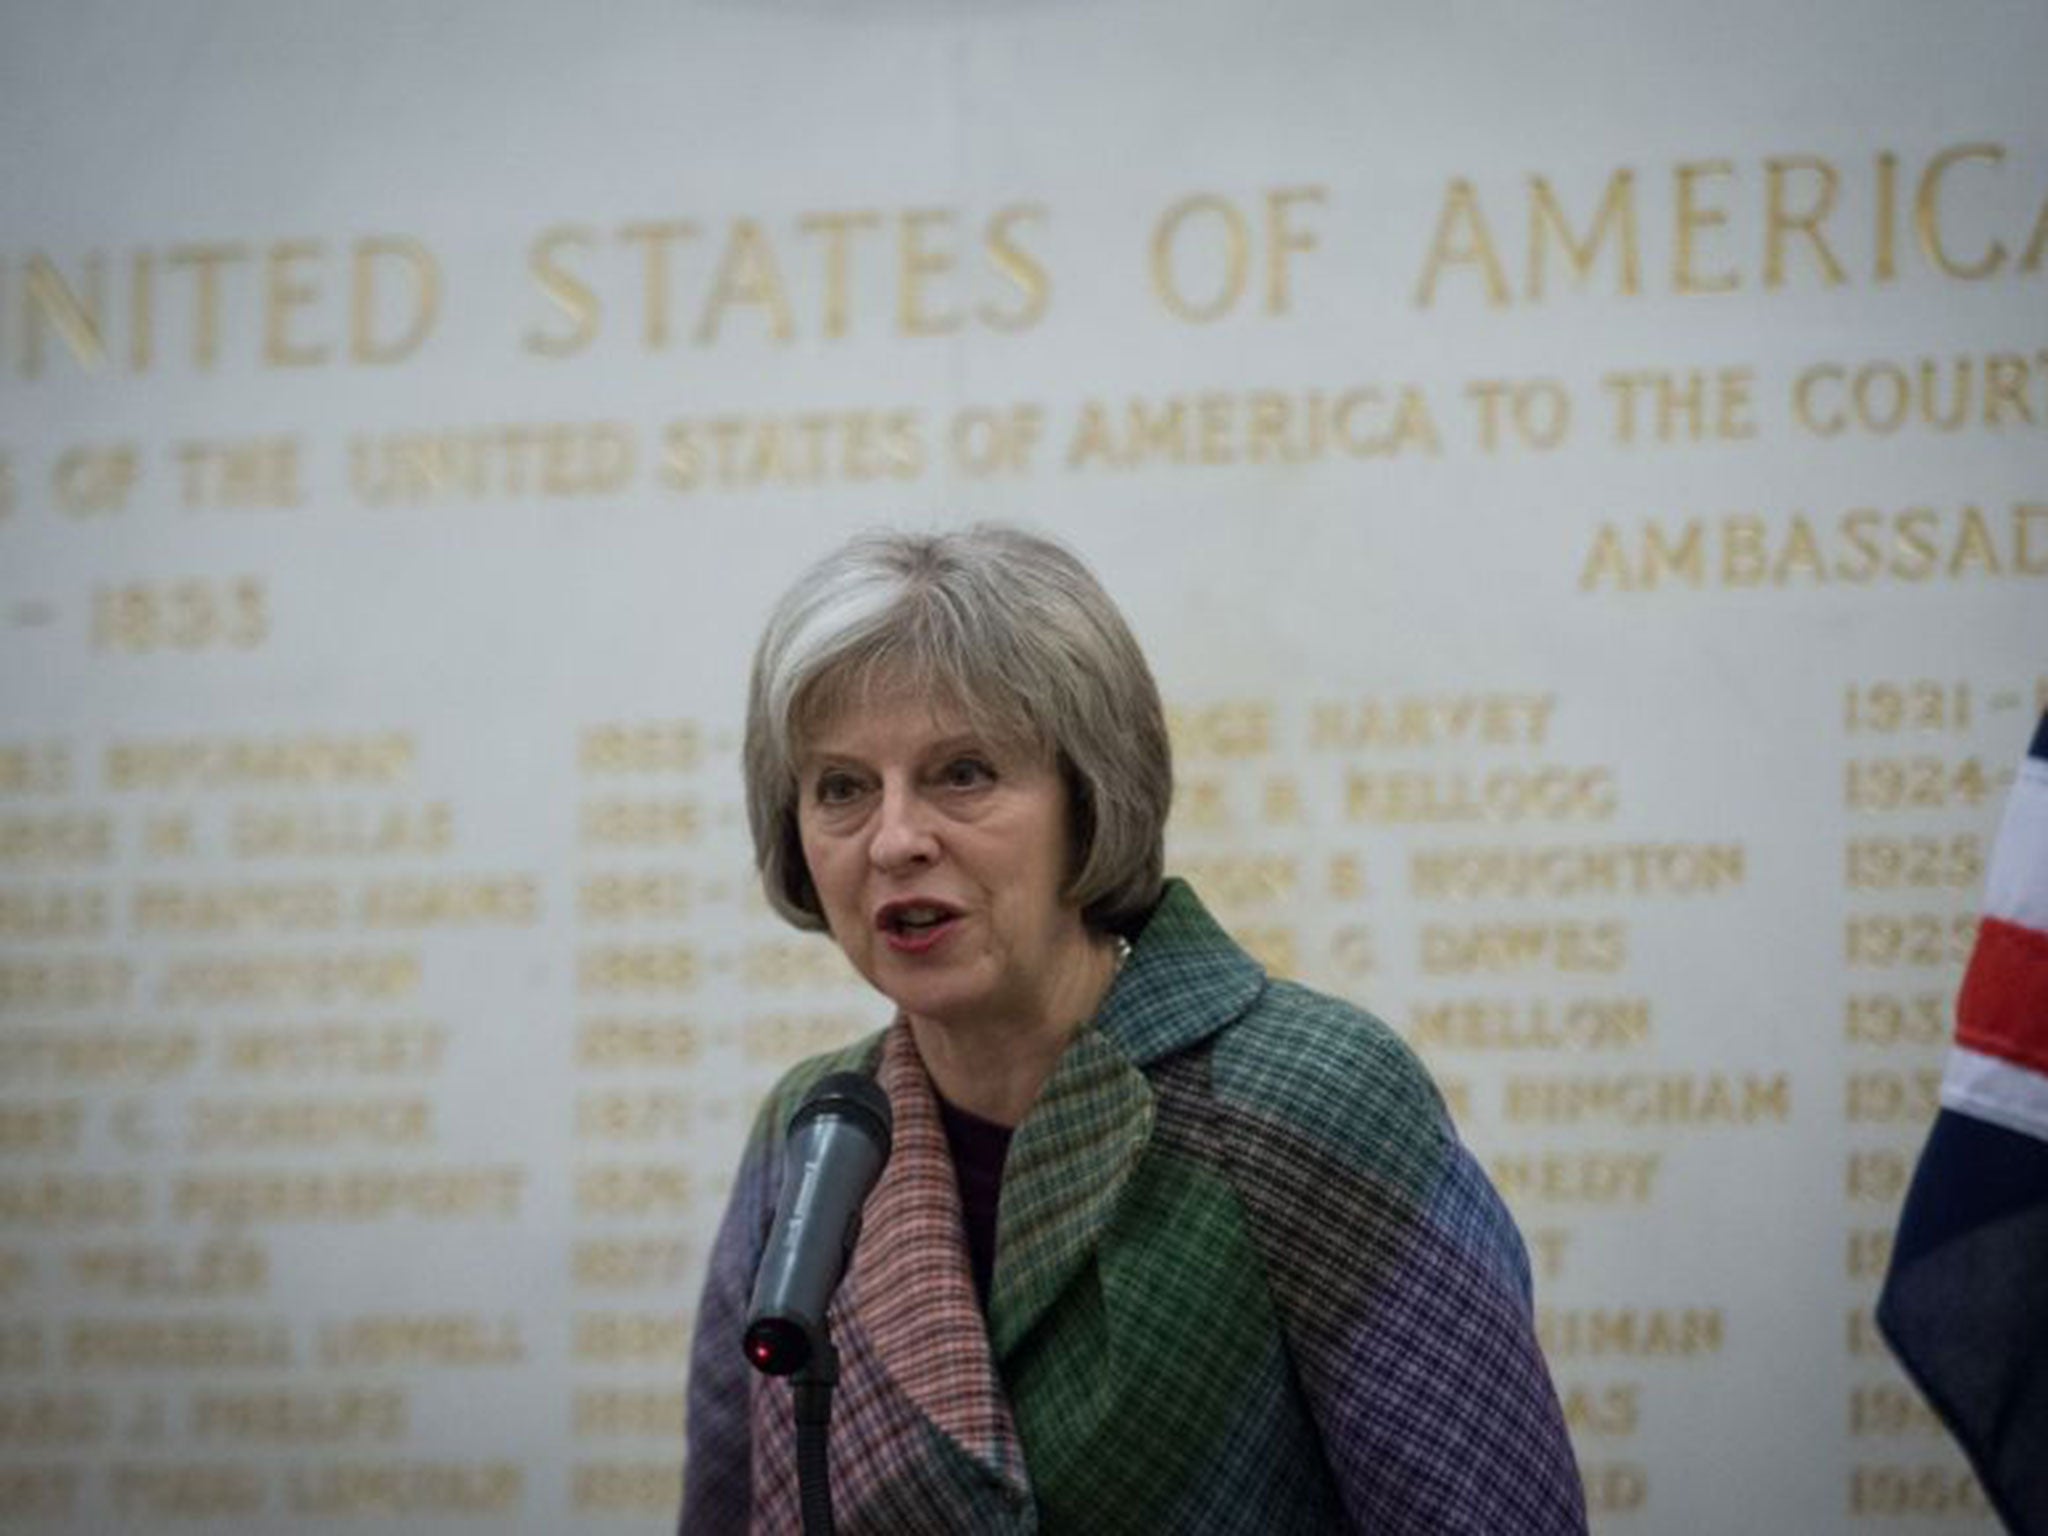 Home Secretary Theresa May was discussing the tackling of modern slavery at the US Embassy in London